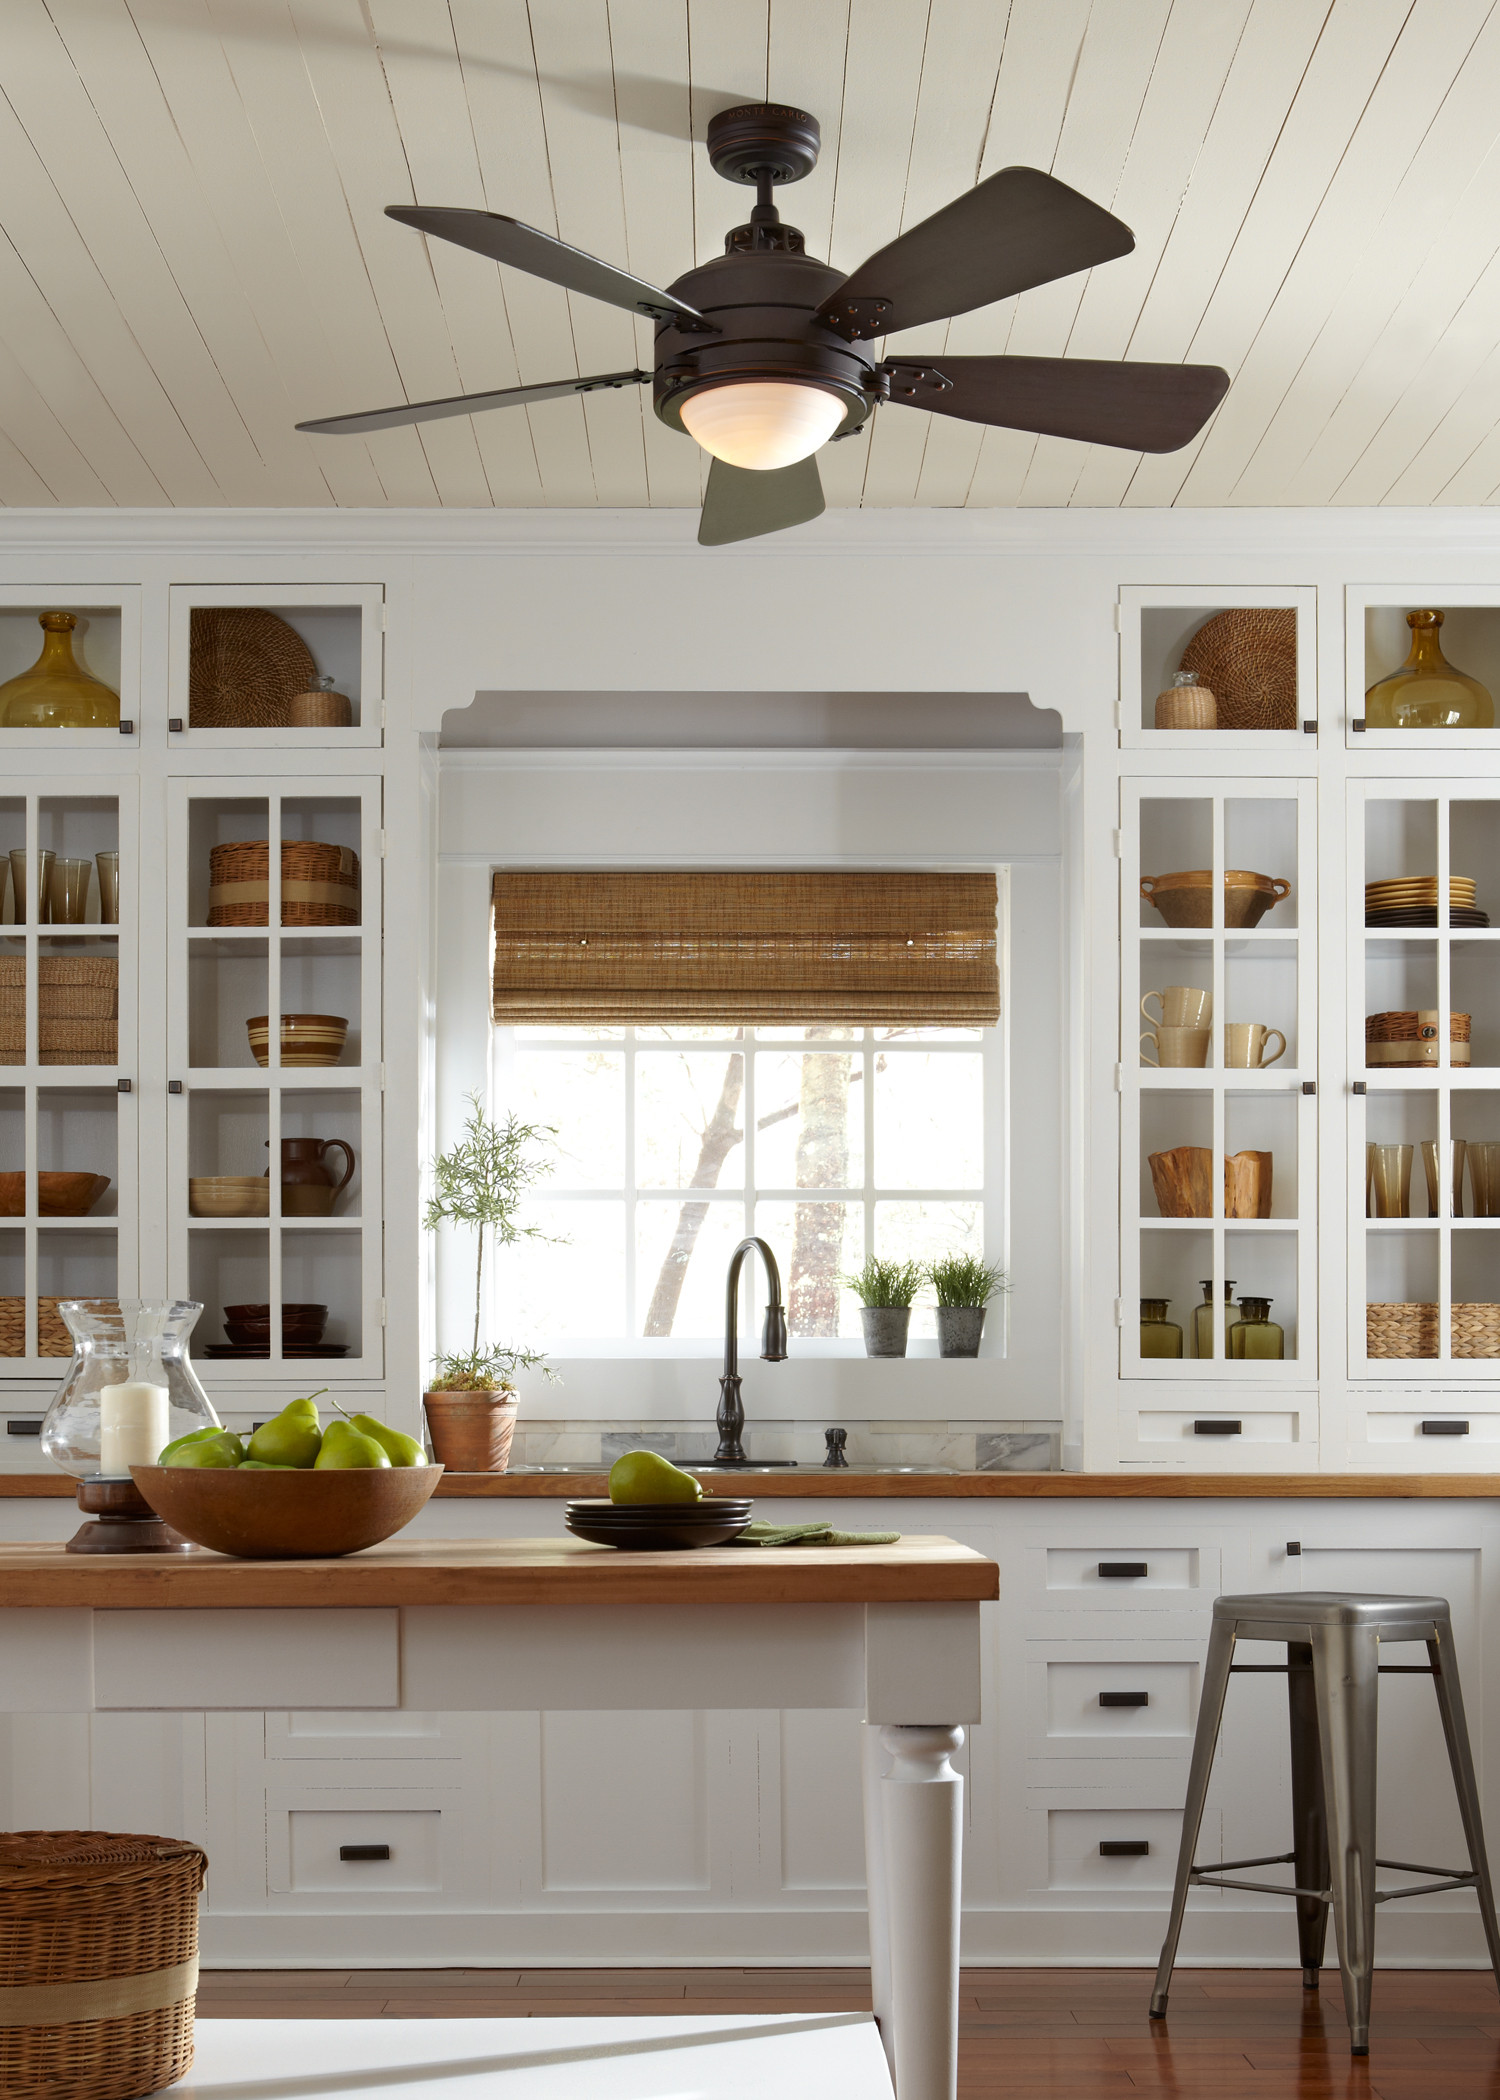 Kitchen Fans With Lights
 10 Tips To Help You Get the Right Ceiling fan for kitchen